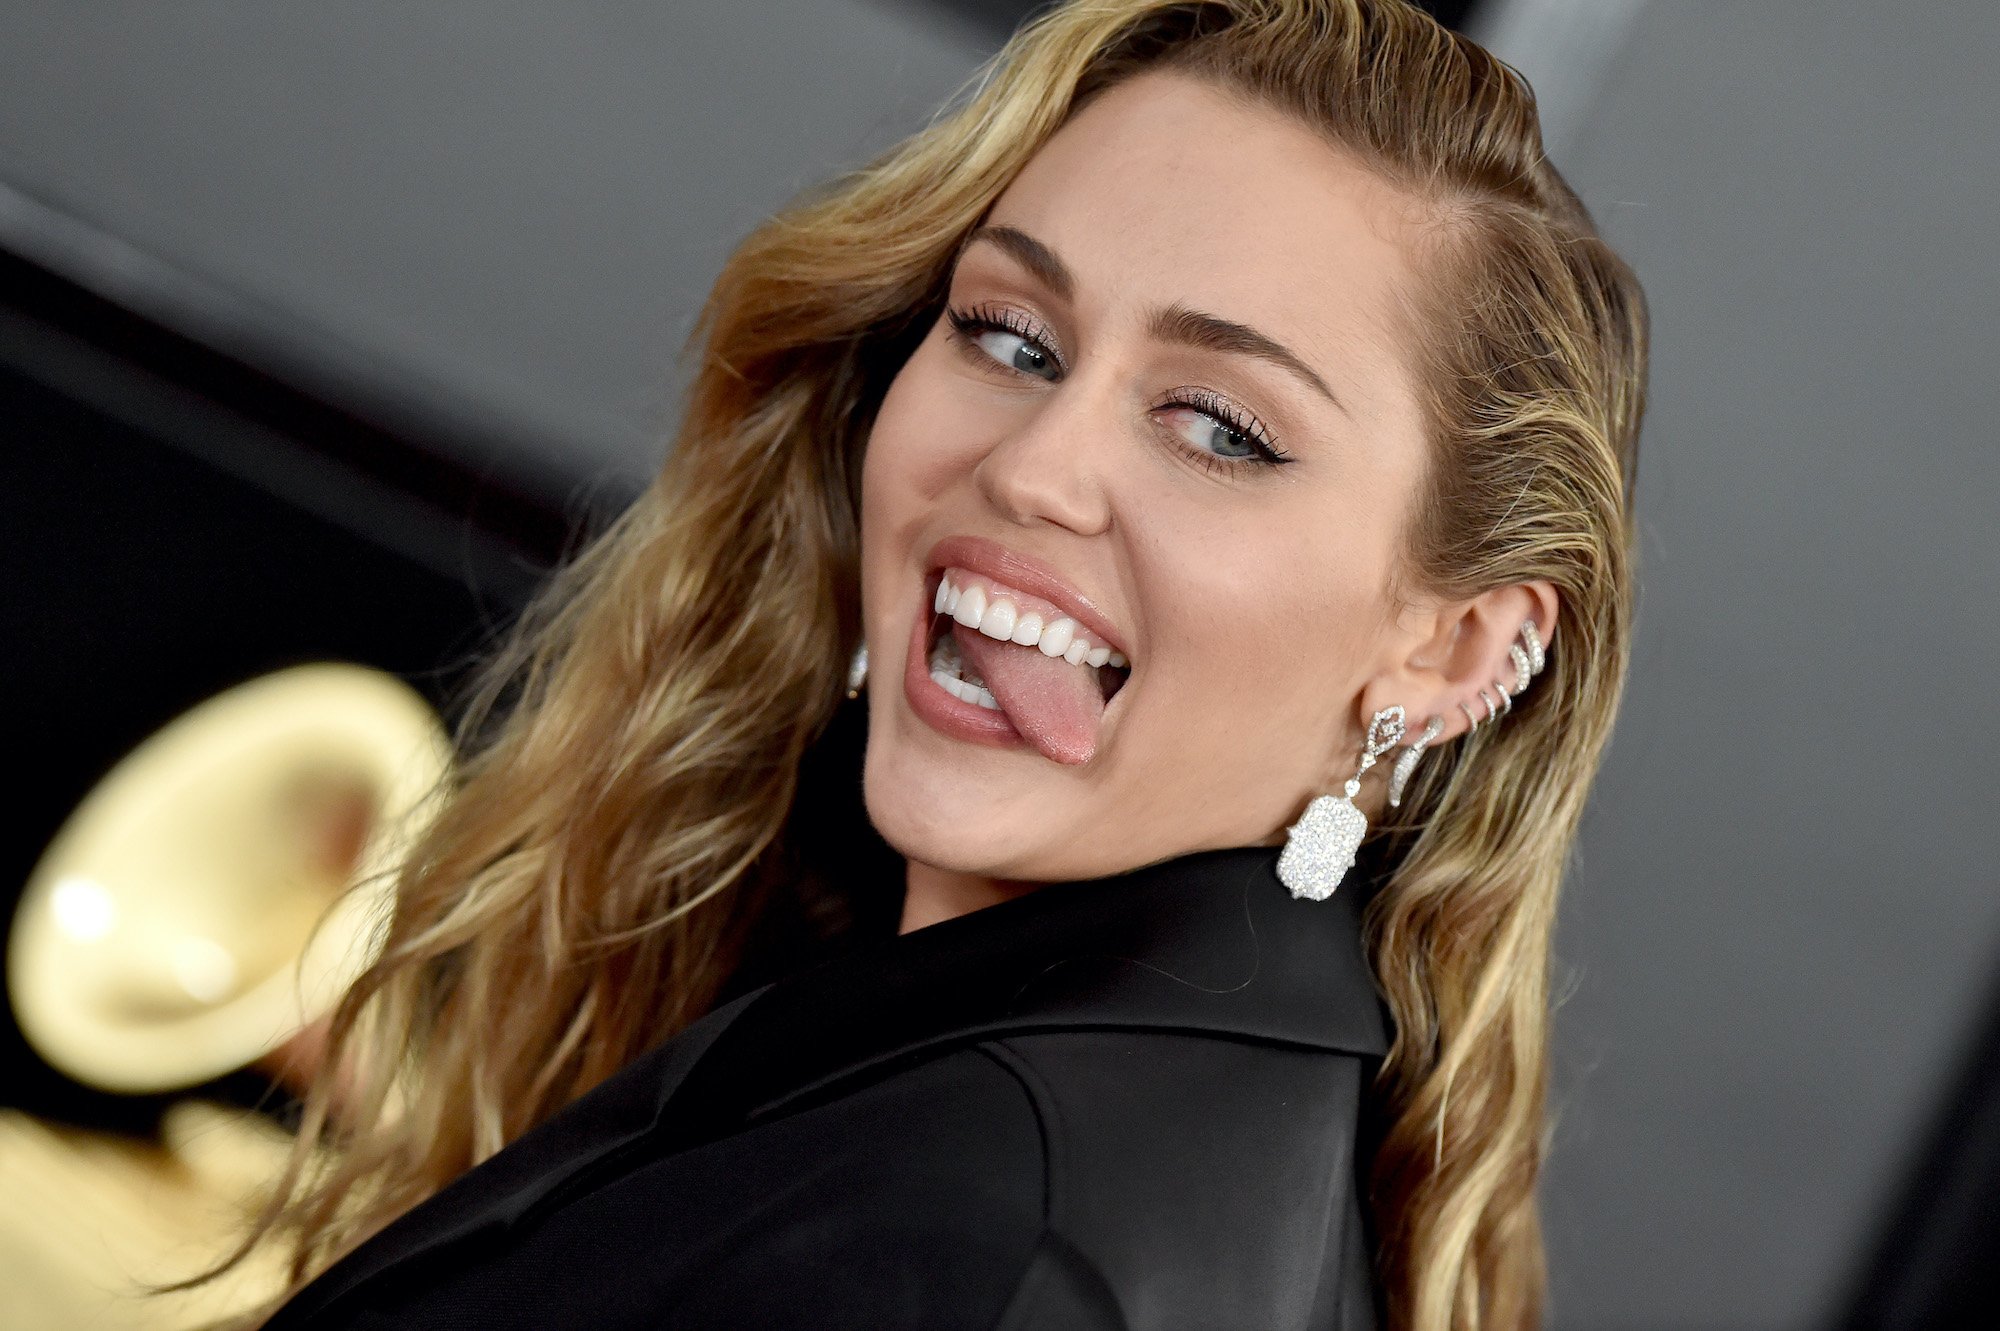 Miley Cyrus sticking out her tongue, turned to the camera